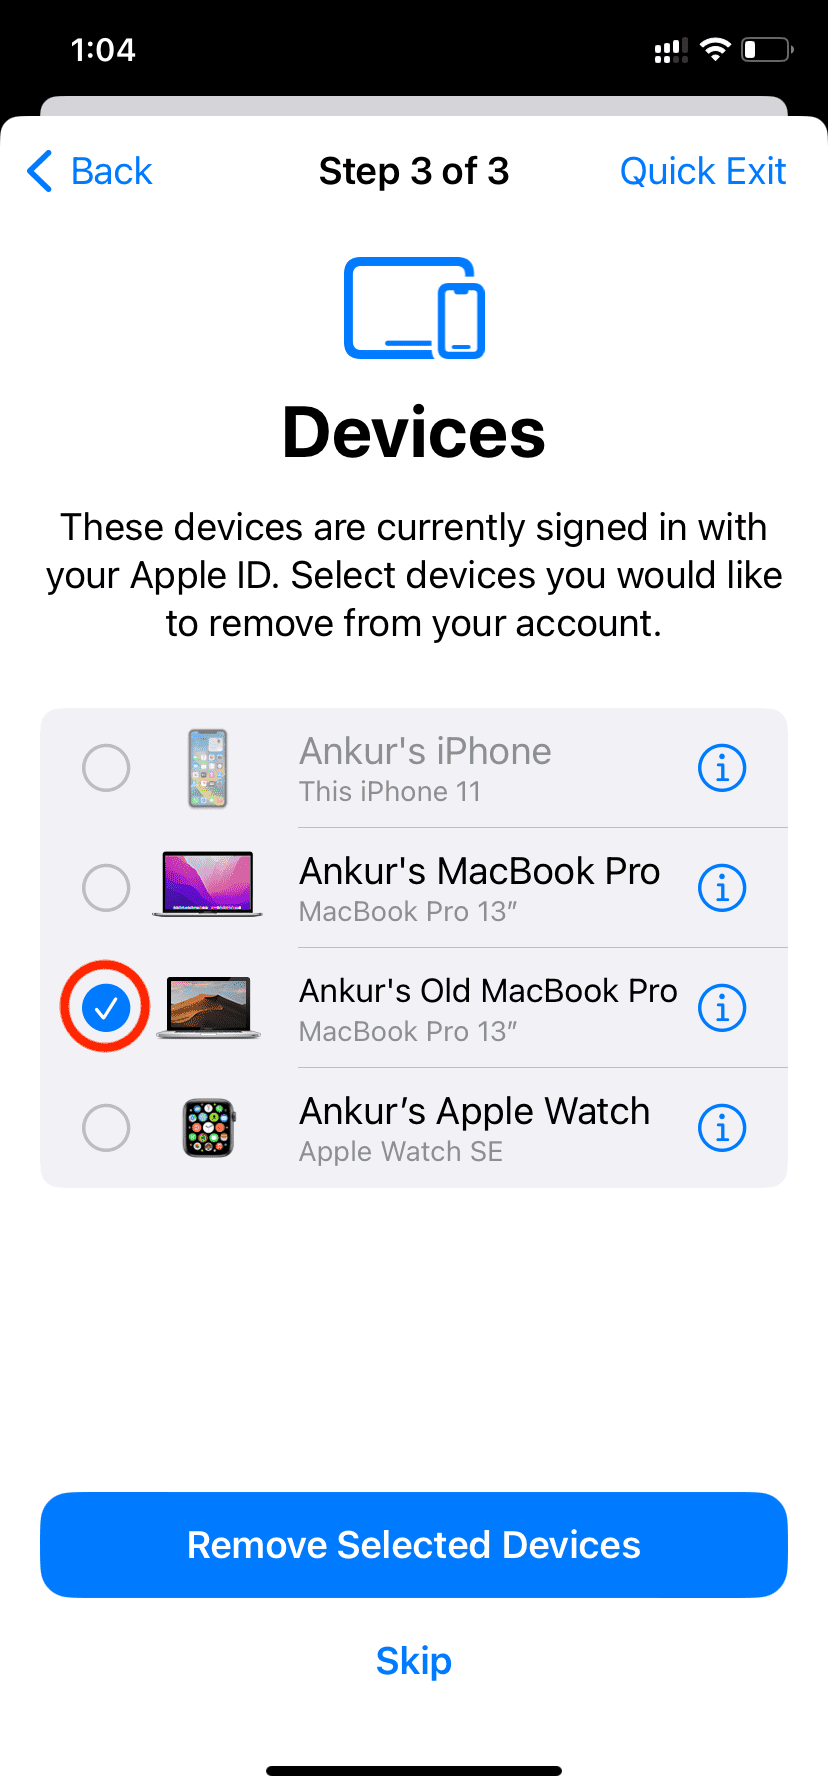 Review your Apple devices in Safety check and remove them